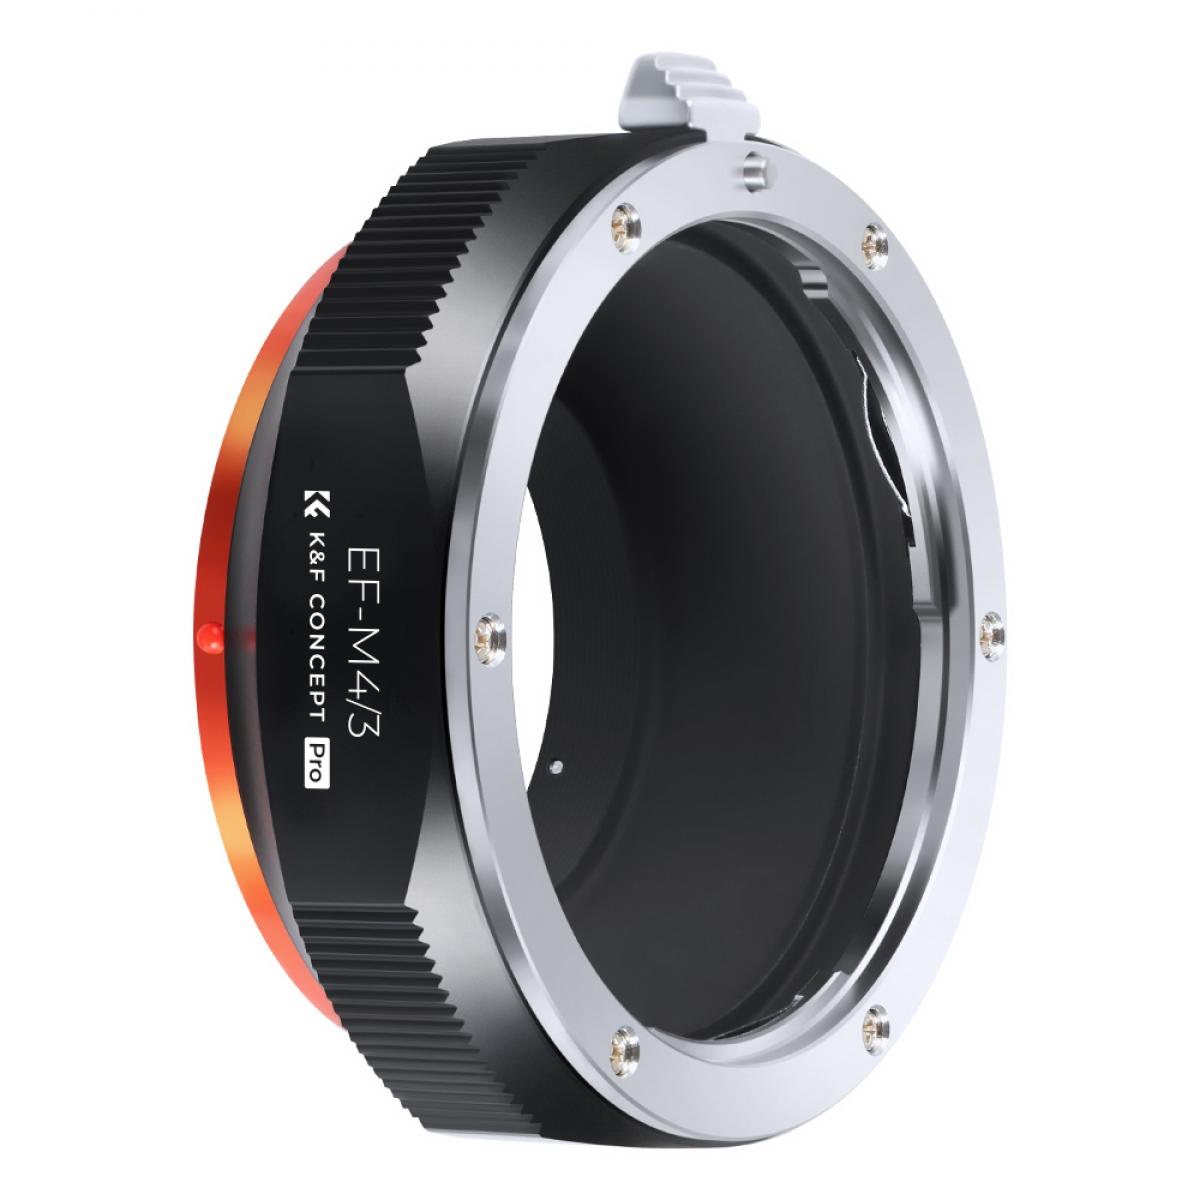 M12125 Canon EOS lens to M4/3 PRO， New in 2022 high precision lens adapter (orange)